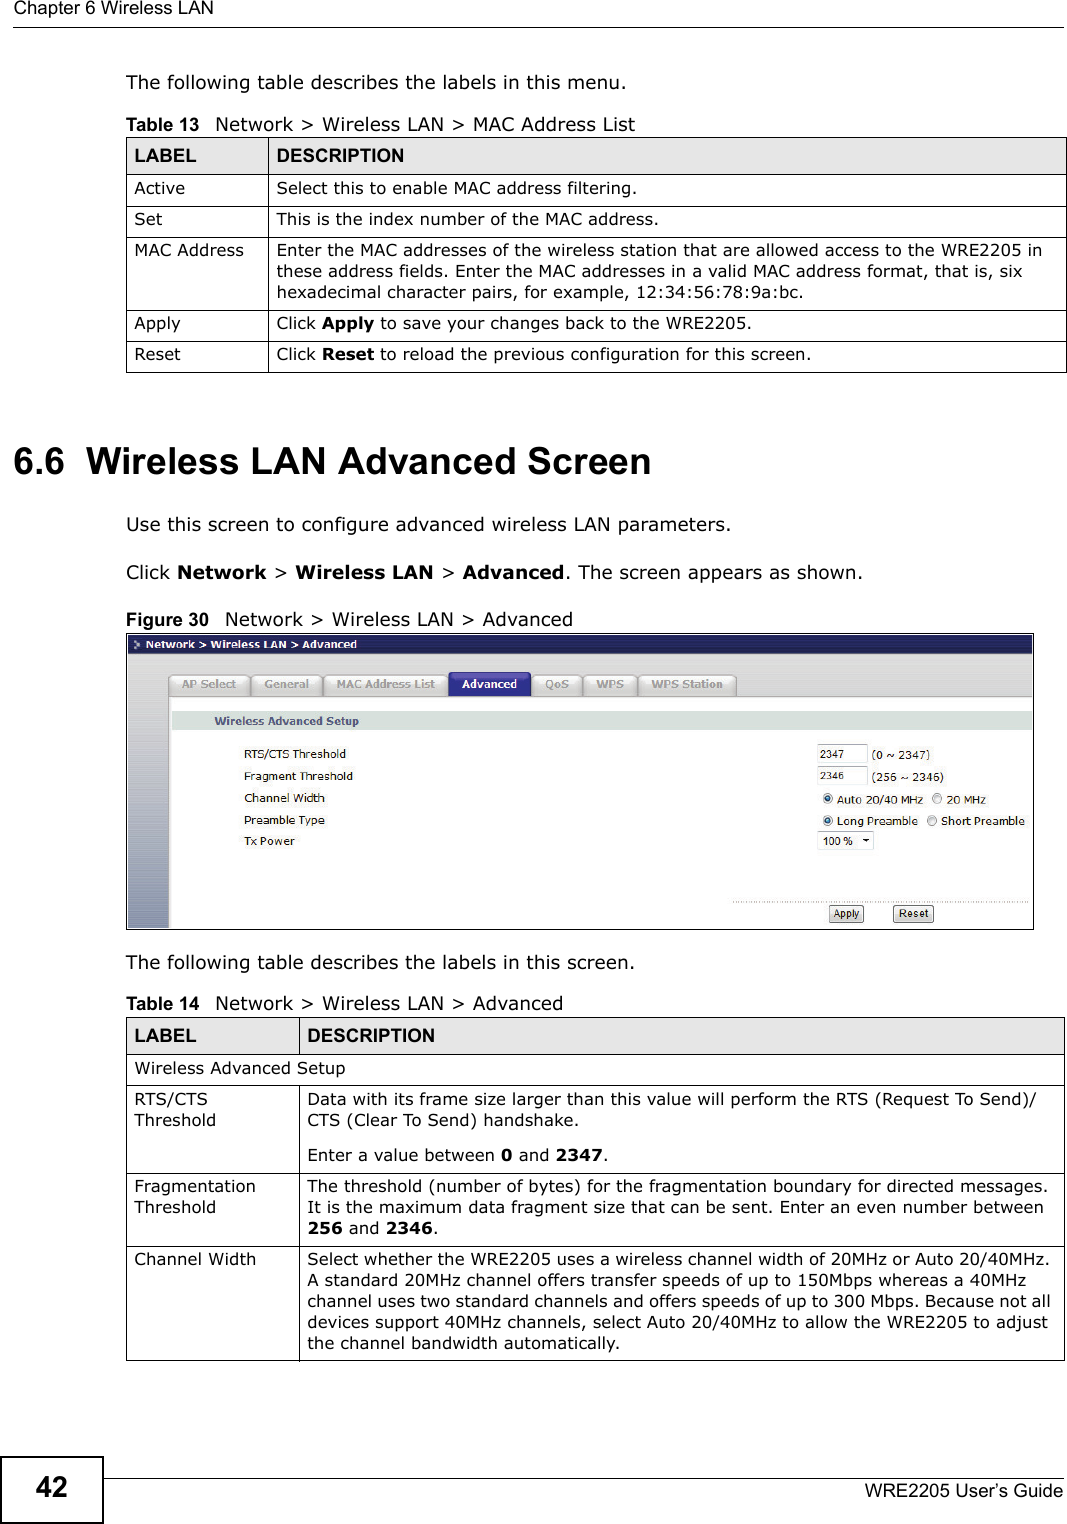 Chapter 6 Wireless LANWRE2205 User’s Guide42The following table describes the labels in this menu.6.6  Wireless LAN Advanced ScreenUse this screen to configure advanced wireless LAN parameters.Click Network &gt; Wireless LAN &gt; Advanced. The screen appears as shown.Figure 30   Network &gt; Wireless LAN &gt; Advanced The following table describes the labels in this screen. Table 13   Network &gt; Wireless LAN &gt; MAC Address ListLABEL DESCRIPTIONActive Select this to enable MAC address filtering.Set This is the index number of the MAC address.MAC Address Enter the MAC addresses of the wireless station that are allowed access to the WRE2205 in these address fields. Enter the MAC addresses in a valid MAC address format, that is, six hexadecimal character pairs, for example, 12:34:56:78:9a:bc.Apply Click Apply to save your changes back to the WRE2205.Reset Click Reset to reload the previous configuration for this screen.Table 14   Network &gt; Wireless LAN &gt; AdvancedLABEL DESCRIPTIONWireless Advanced SetupRTS/CTS ThresholdData with its frame size larger than this value will perform the RTS (Request To Send)/CTS (Clear To Send) handshake. Enter a value between 0 and 2347. Fragmentation ThresholdThe threshold (number of bytes) for the fragmentation boundary for directed messages. It is the maximum data fragment size that can be sent. Enter an even number between 256 and 2346.Channel Width Select whether the WRE2205 uses a wireless channel width of 20MHz or Auto 20/40MHz. A standard 20MHz channel offers transfer speeds of up to 150Mbps whereas a 40MHz channel uses two standard channels and offers speeds of up to 300 Mbps. Because not all devices support 40MHz channels, select Auto 20/40MHz to allow the WRE2205 to adjust the channel bandwidth automatically.